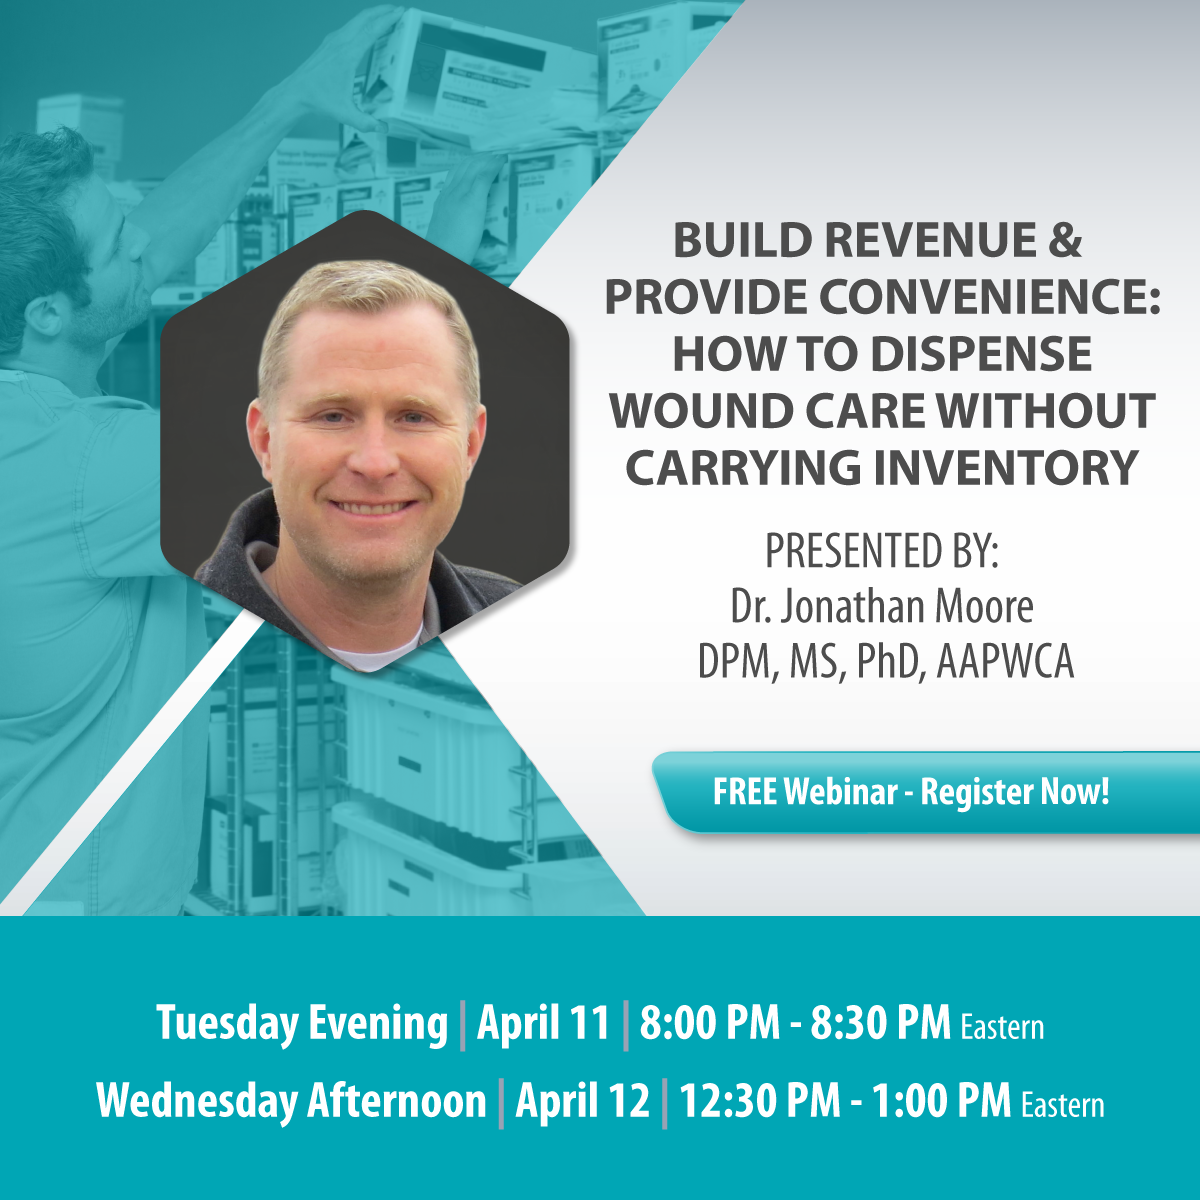 Webinar - Build Revenue & Provide Convenience: How To Dispense Wound Care Without Carrying Inventory